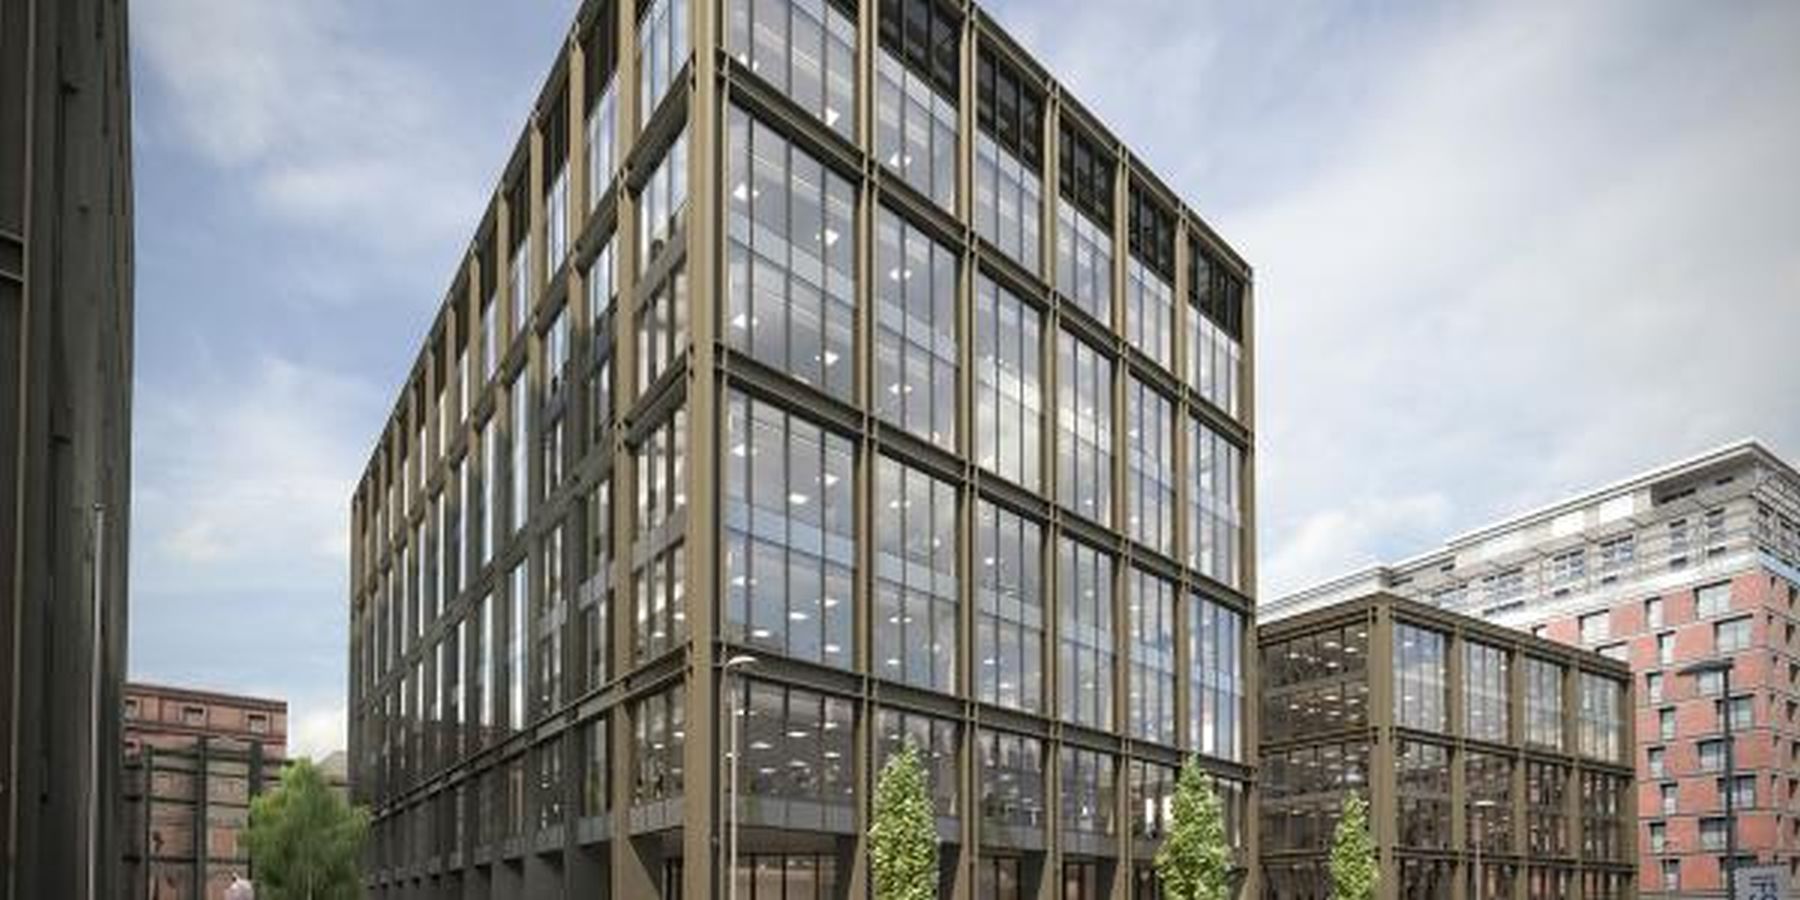 Ryden welcomes office developers’ commitment to Glasgow’s environmental credentials Image